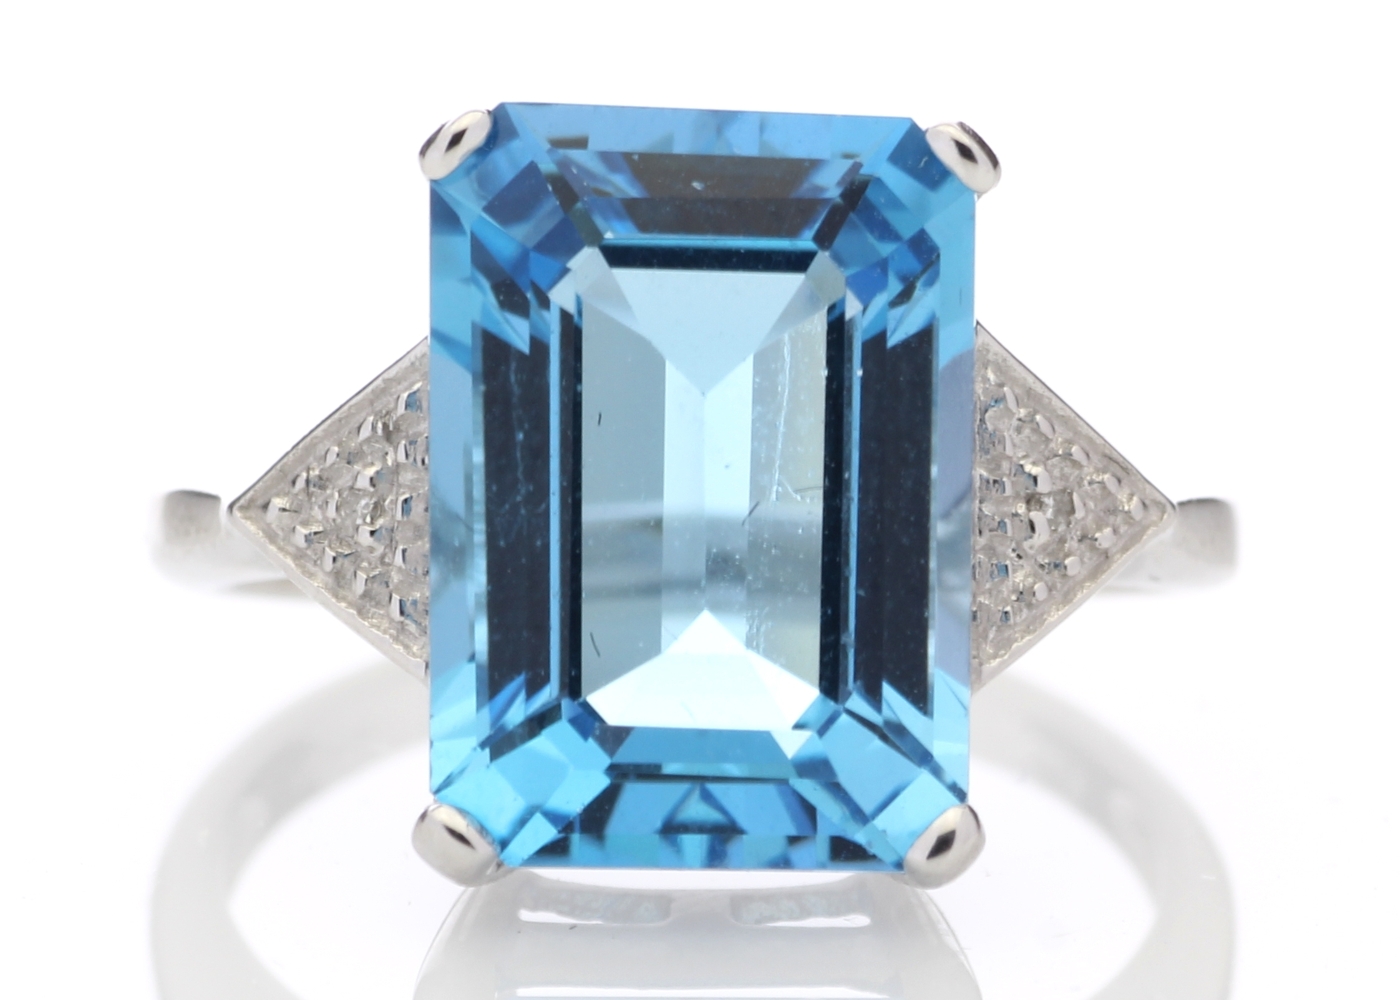 9ct White Gold Diamond and Blue Topaz Ring 8.25 Carats - Image 2 of 7